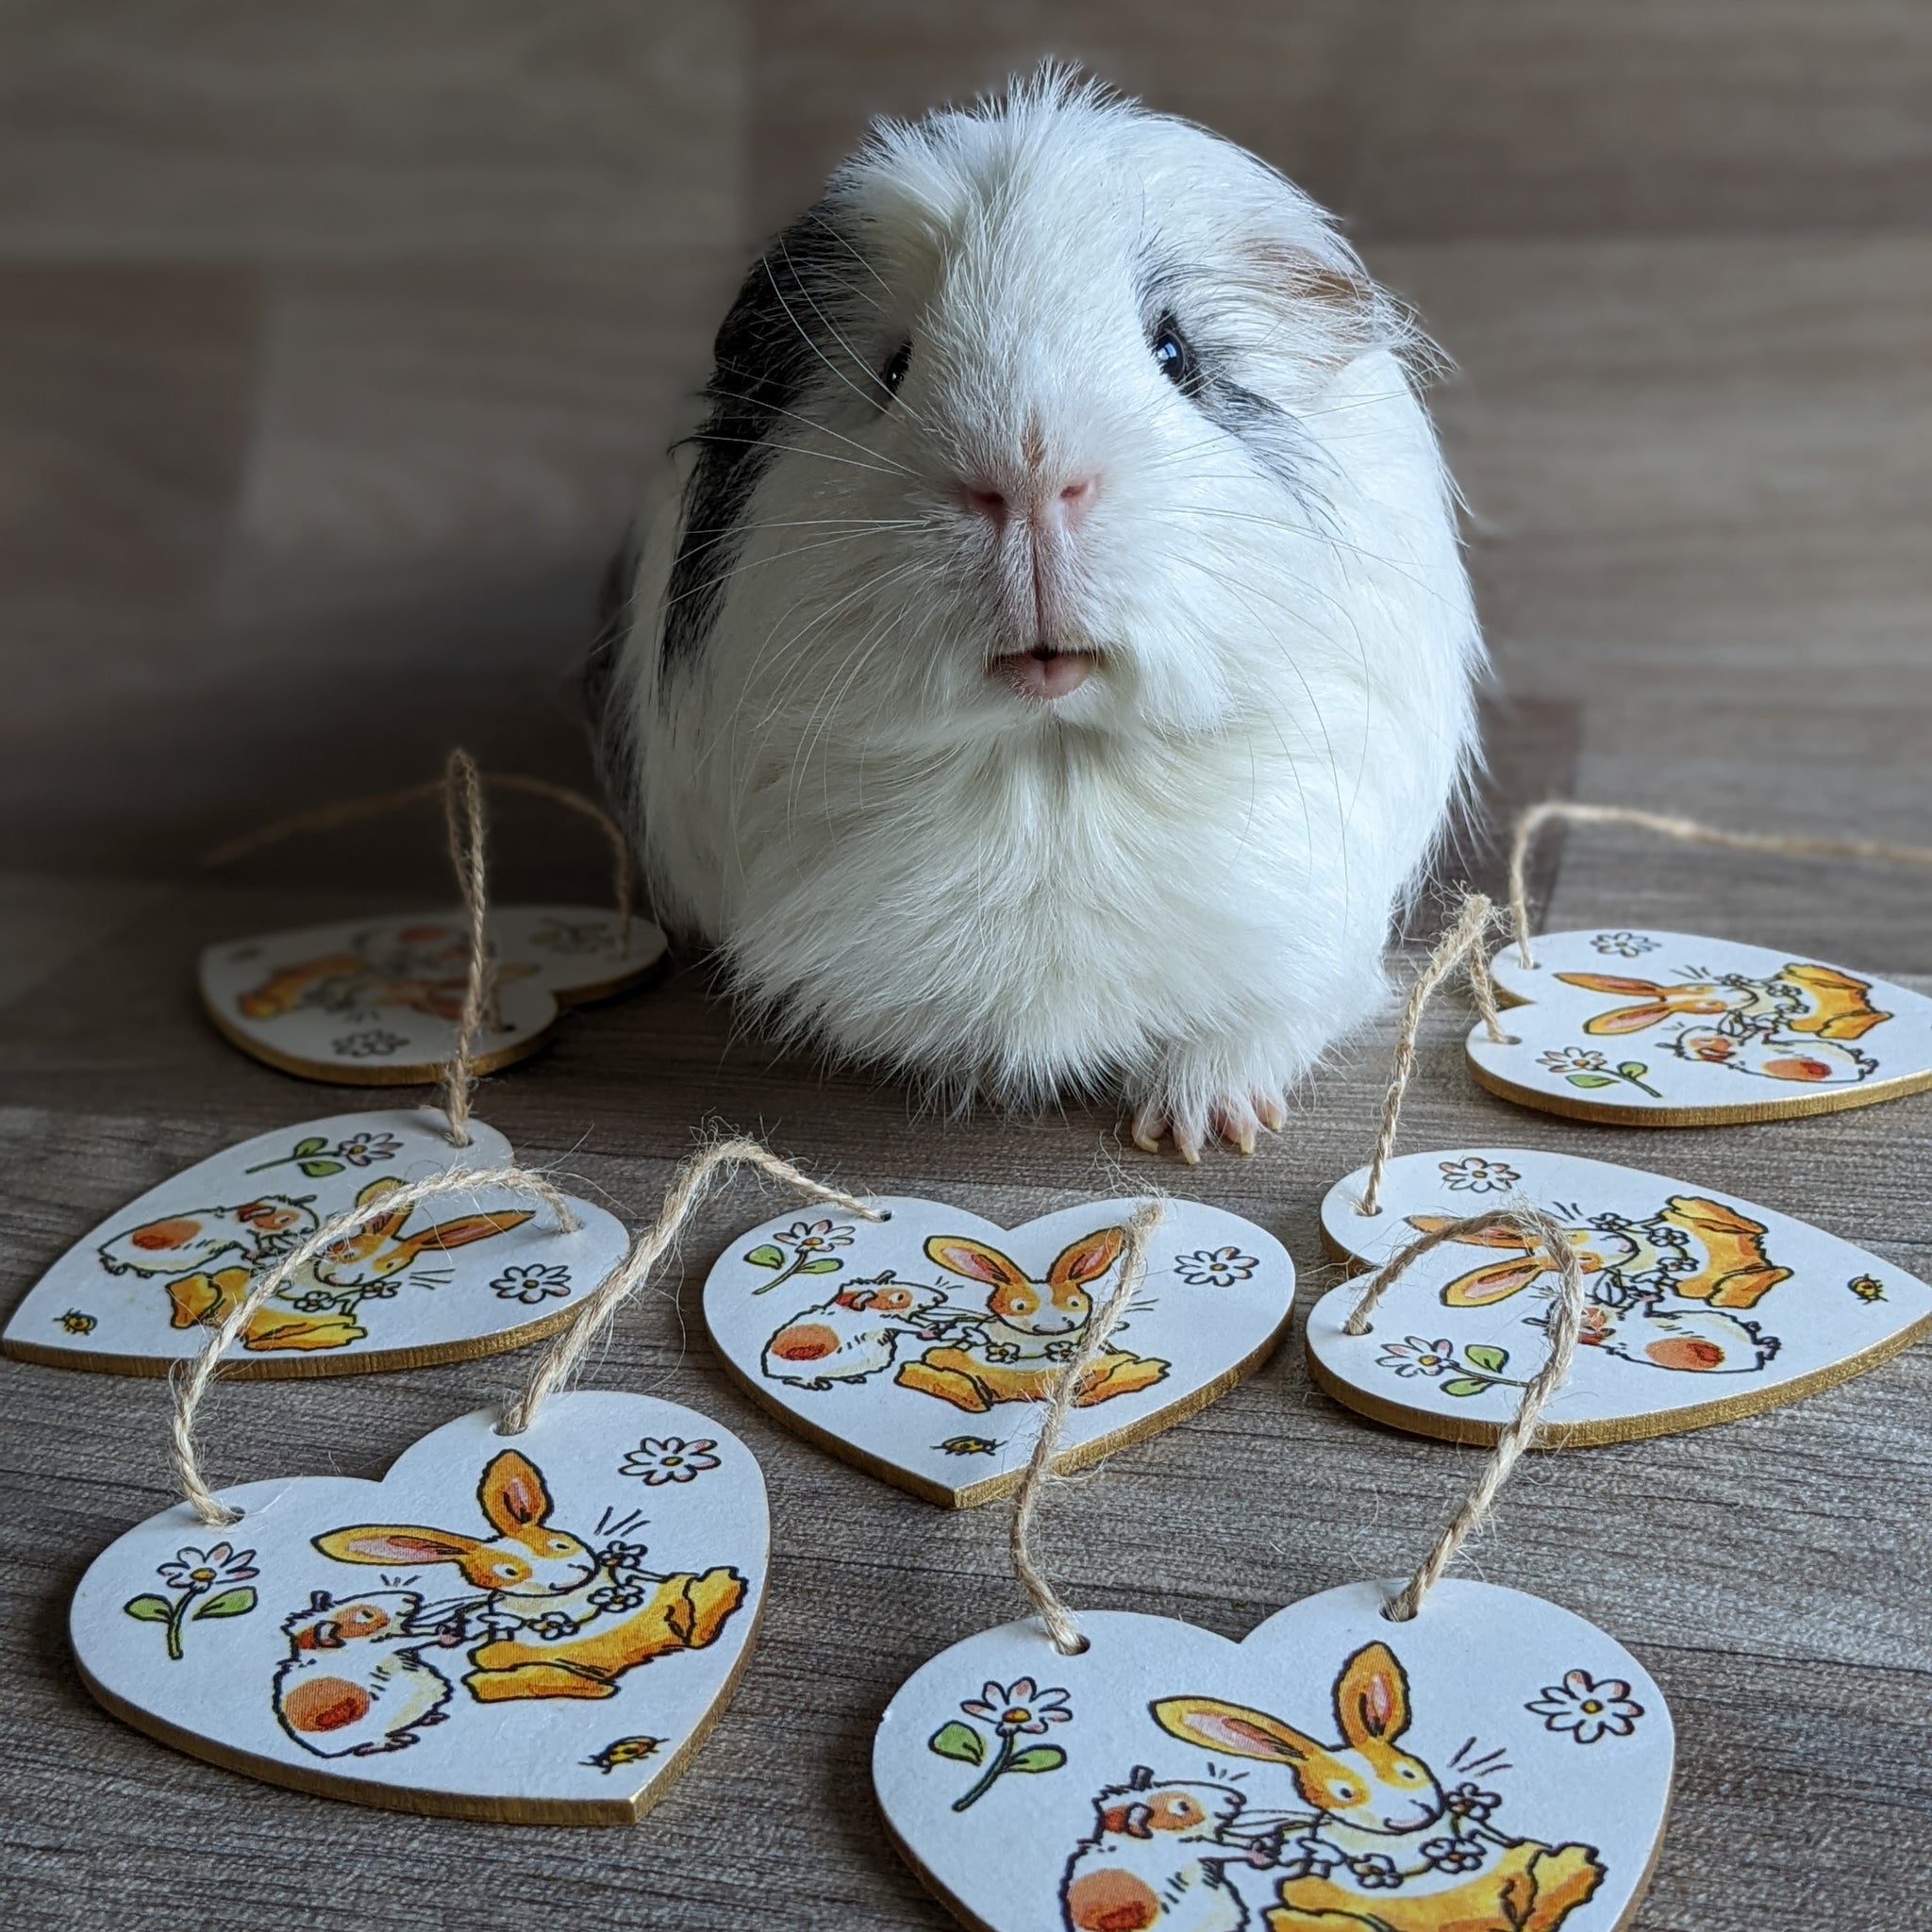 Wooden Rabbit and Guinea Pig Heart Bunting (Daisy Necklace)